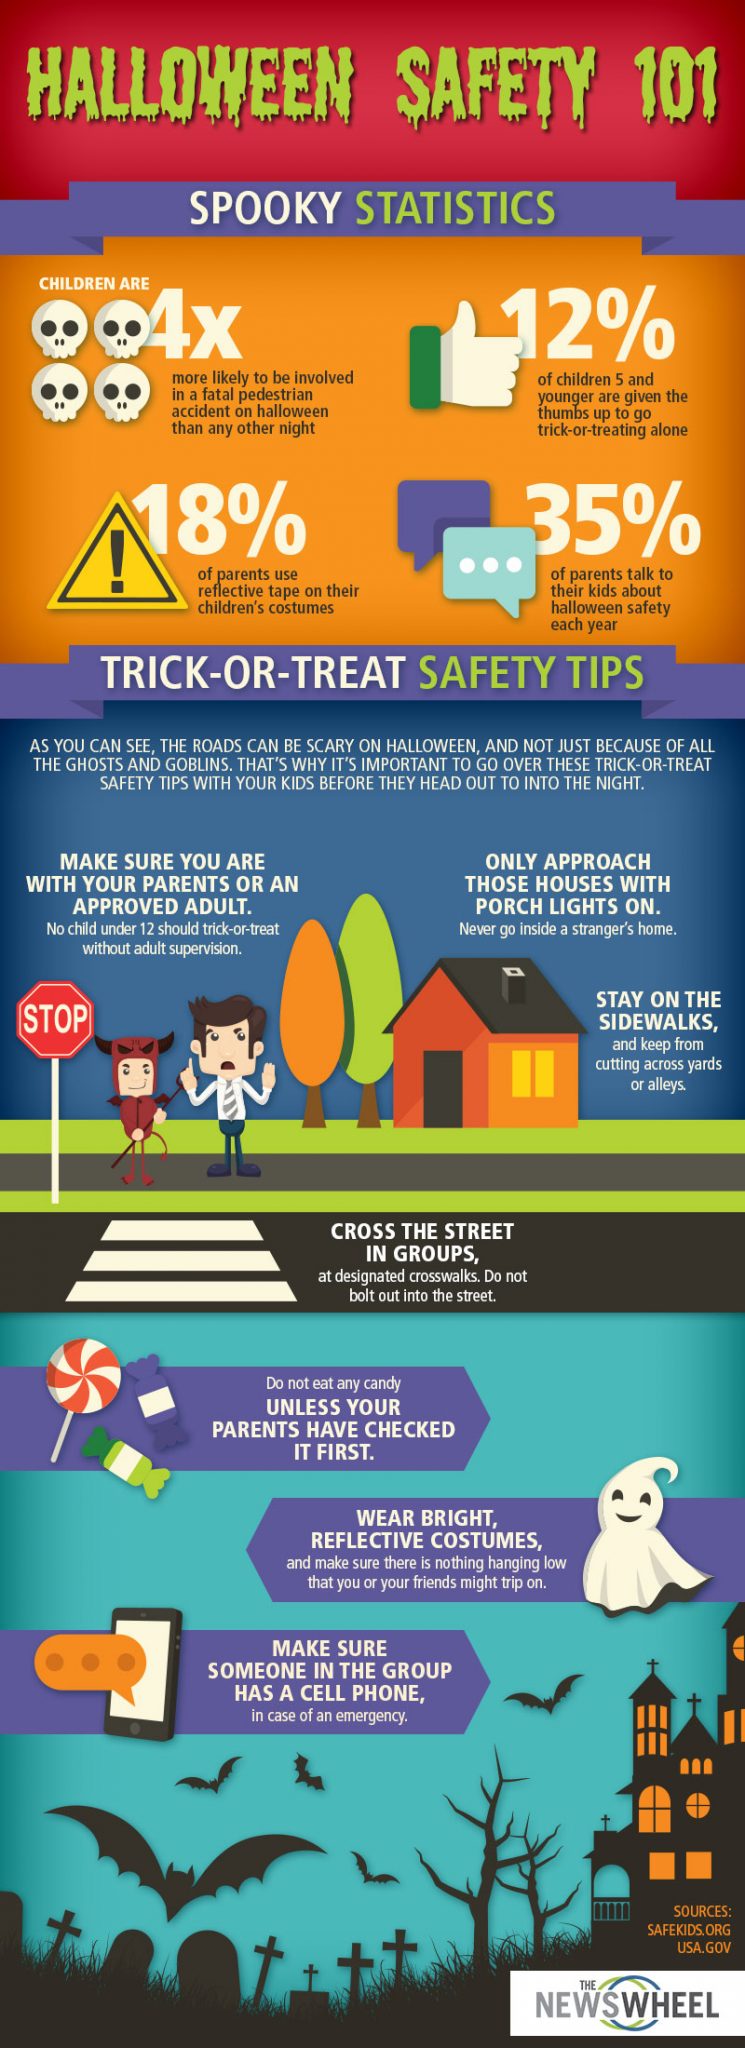 Trick-or-Treat Safety Infographic: Keep Your Night Spooky and Safe